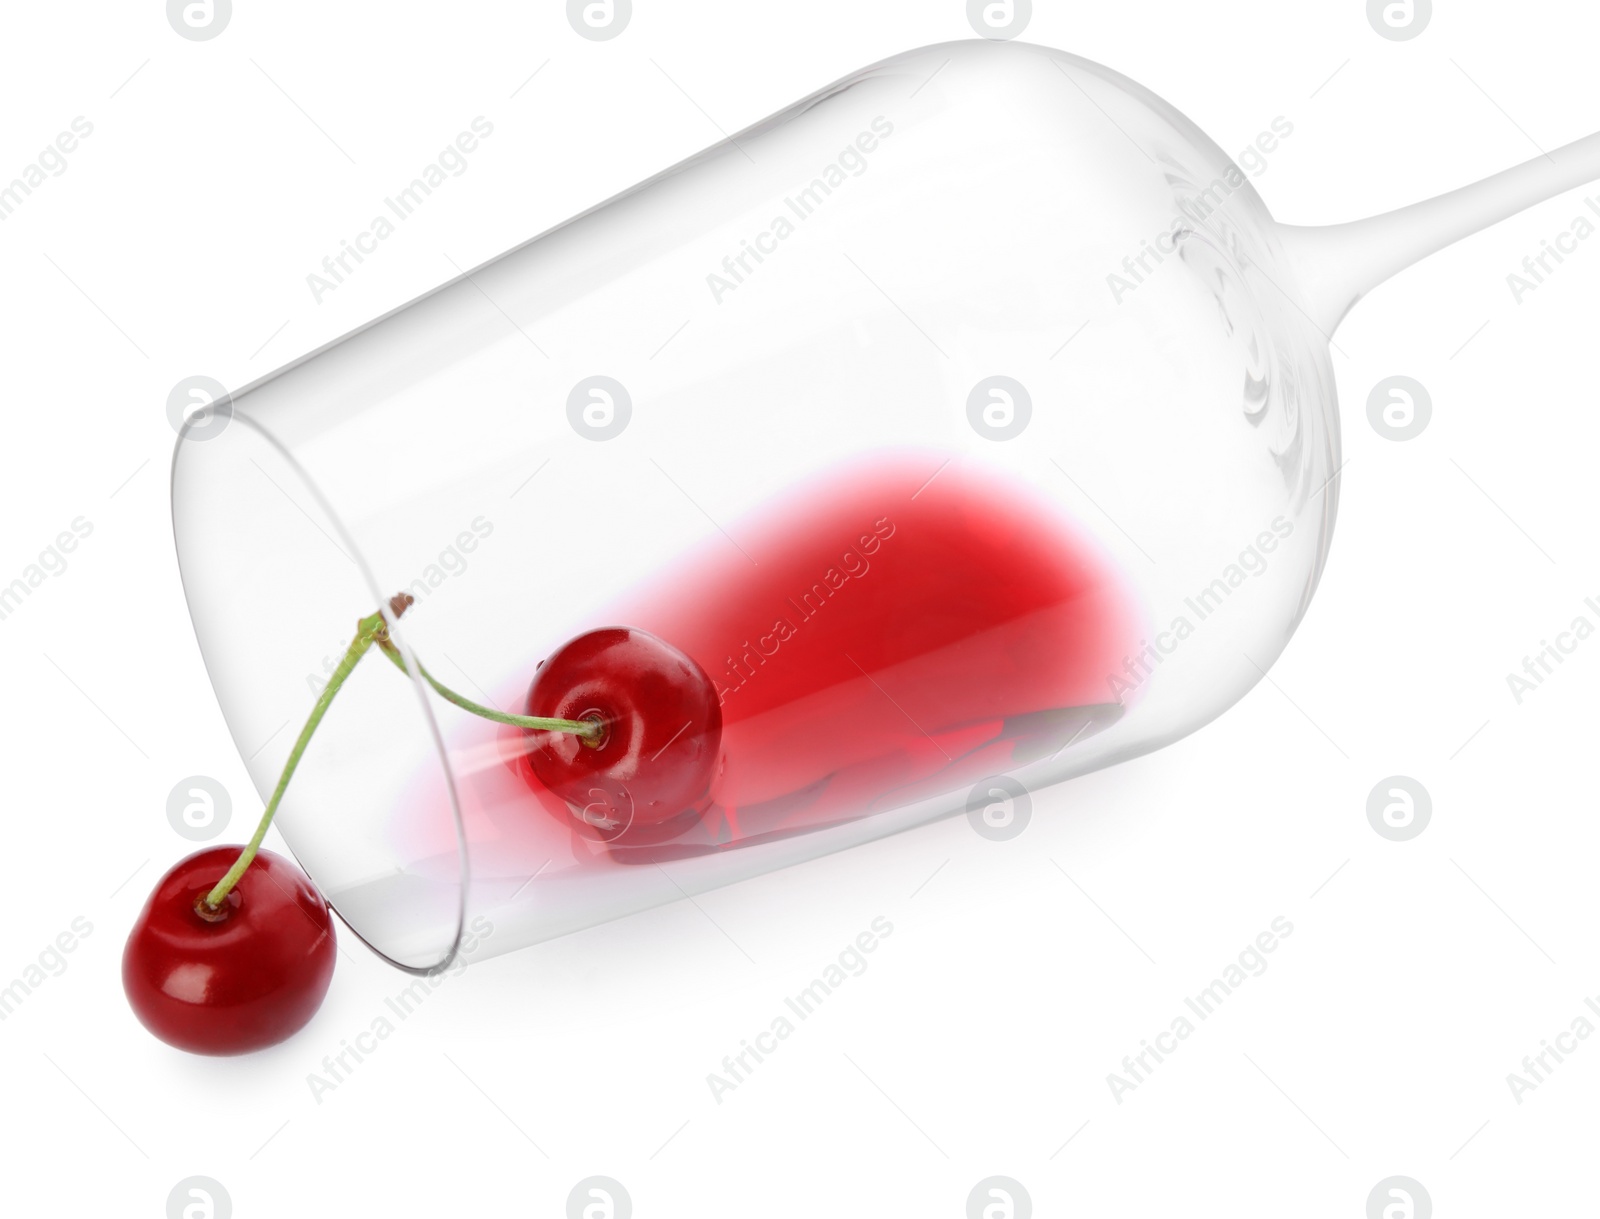 Photo of Overturned glass of delicious cherry wine and ripe juicy berries isolated on white